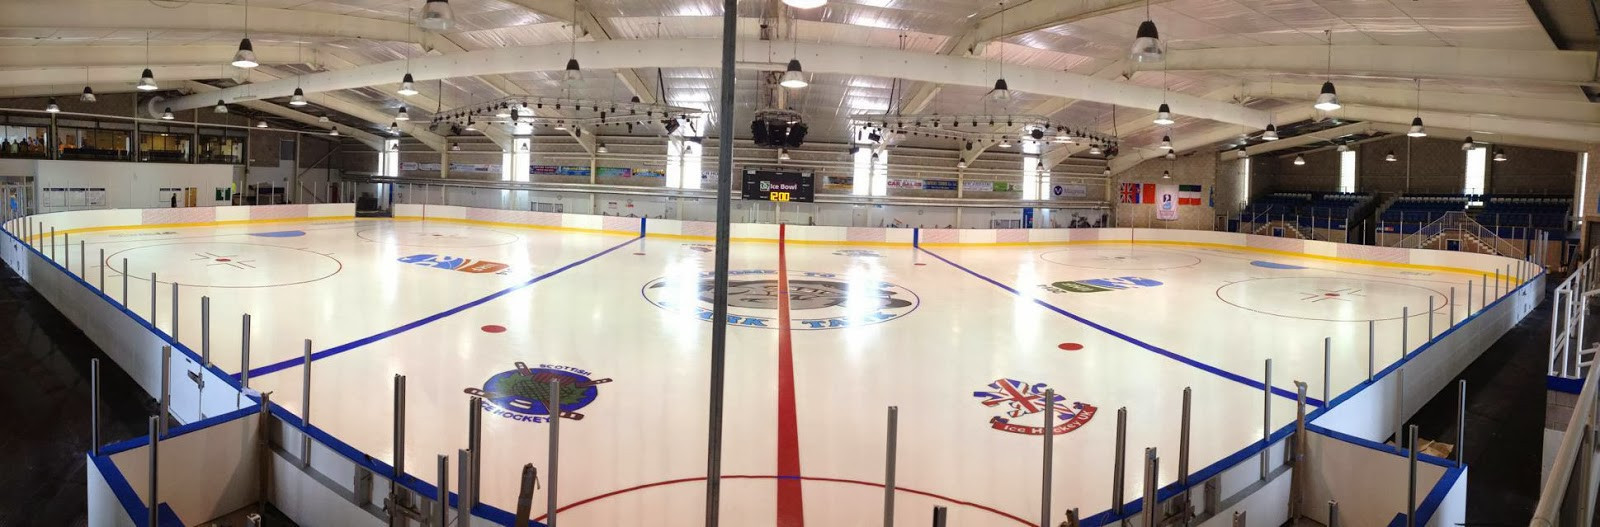 Dumfries Ice Bowl will host the 2019 IIHF Women’s World Championship Division II Group A ©Ice Hockey UK